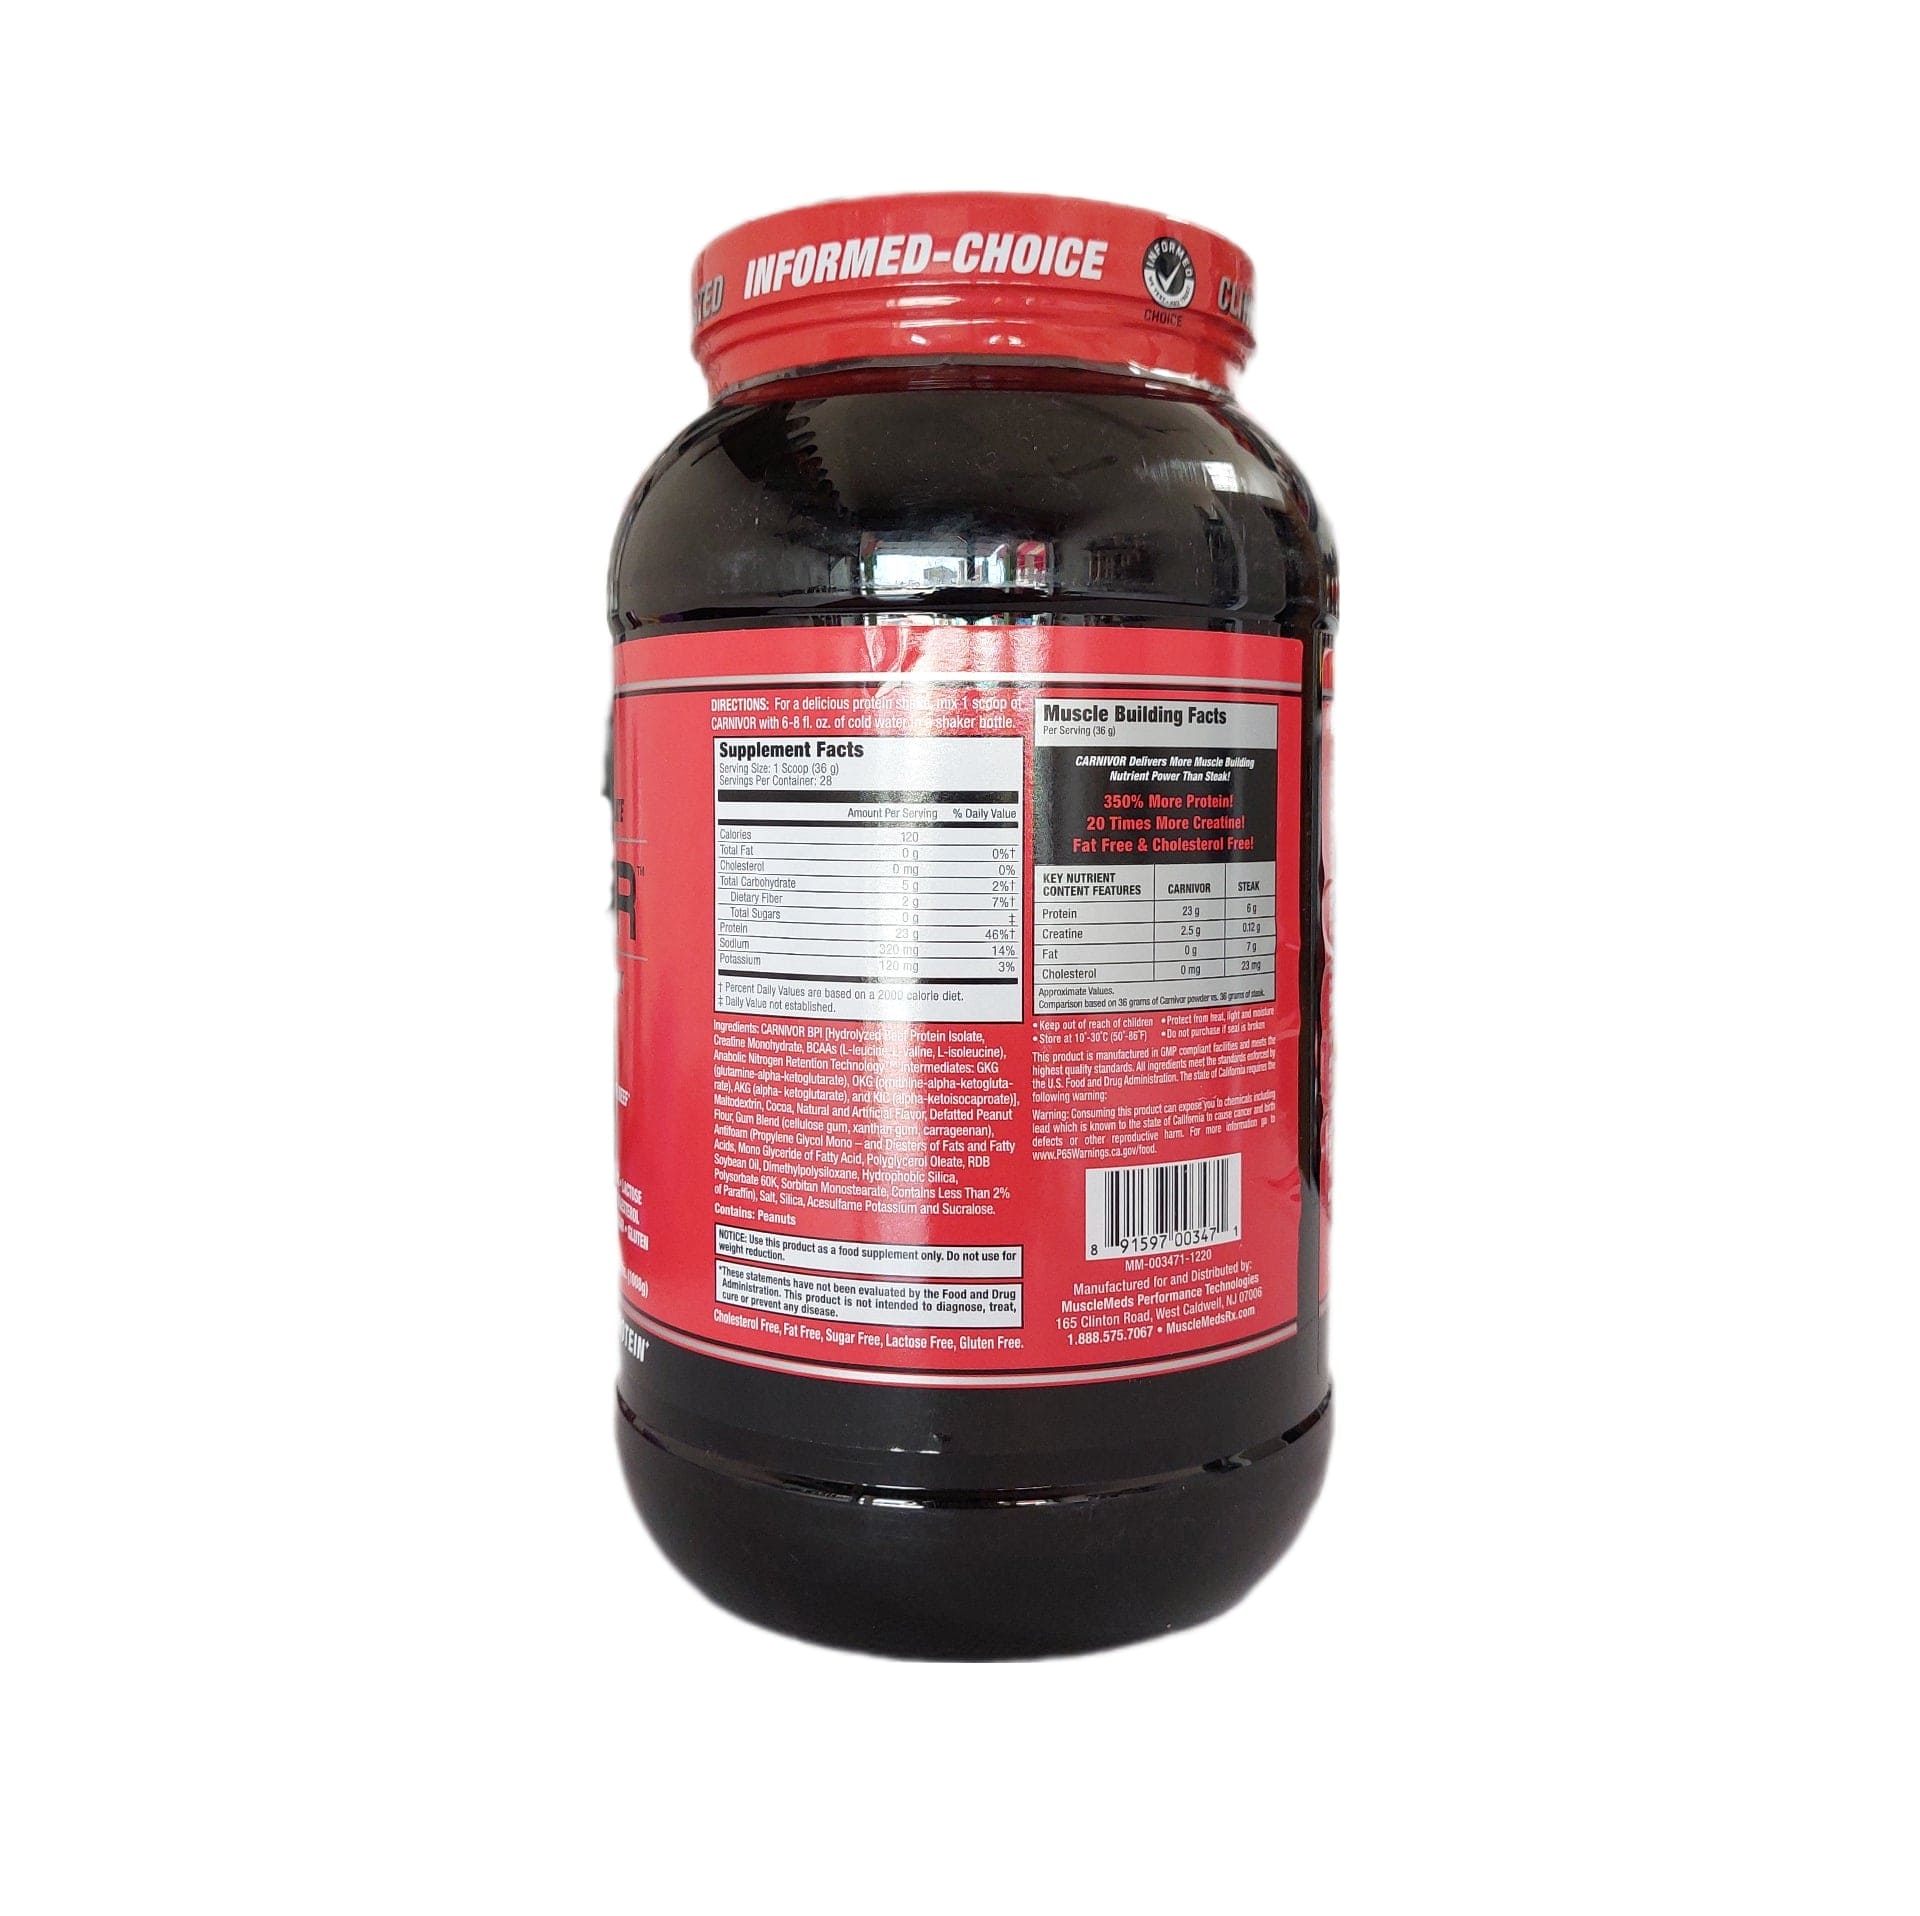 Proteina Musclemeds Carnivor 2 Lbs - Body Fit Supplements